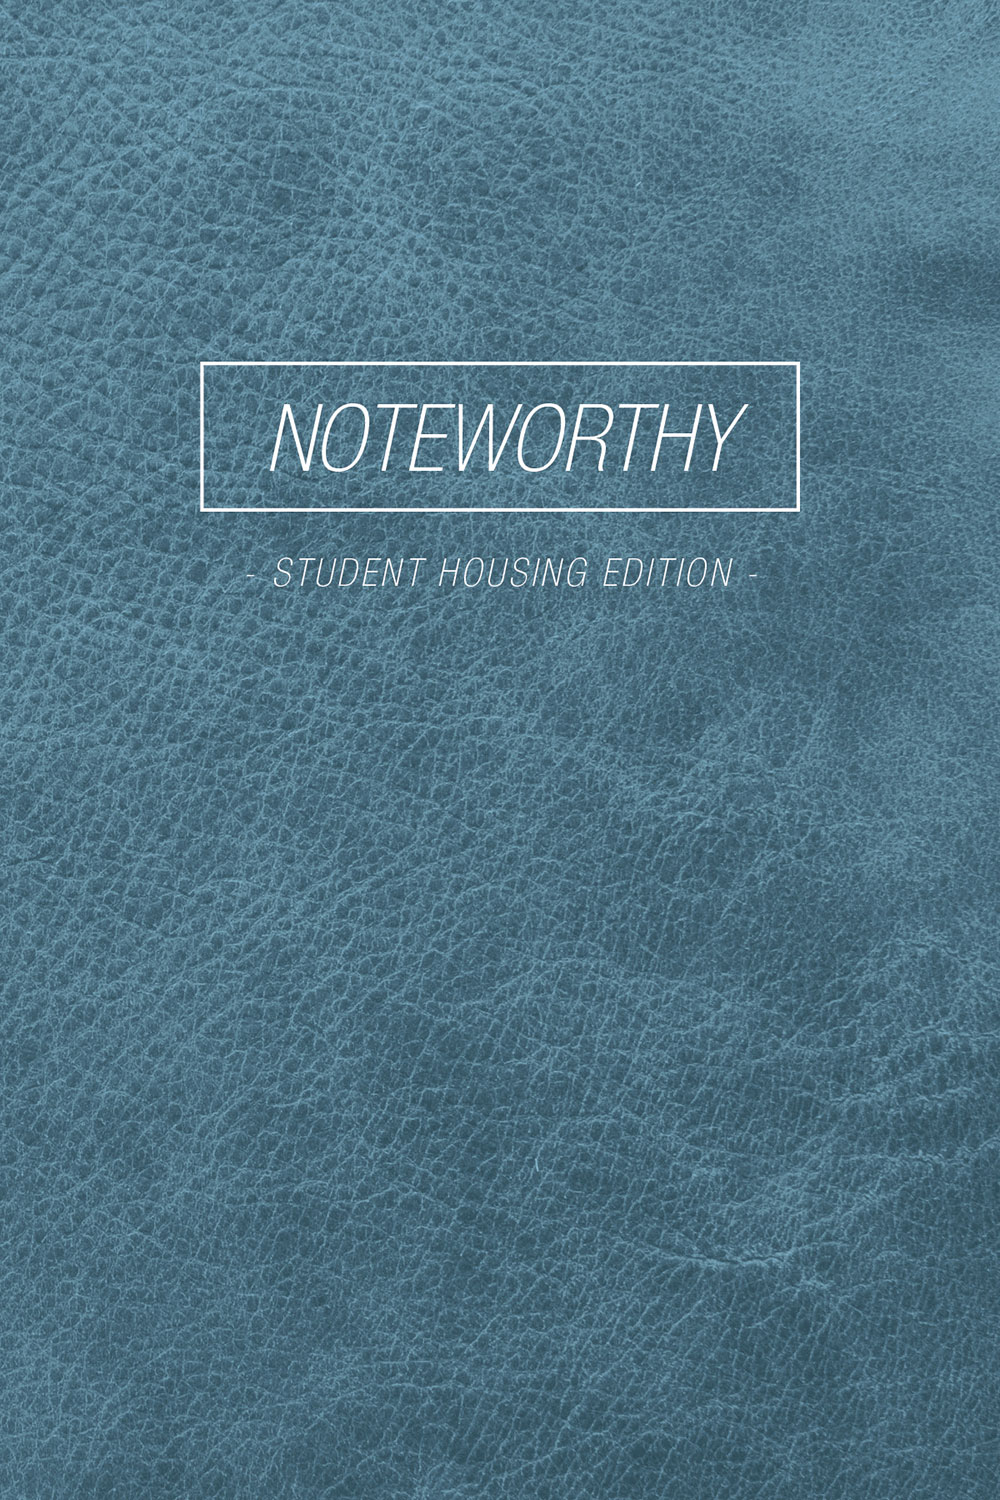 Noteworthy | Student Housing Edition